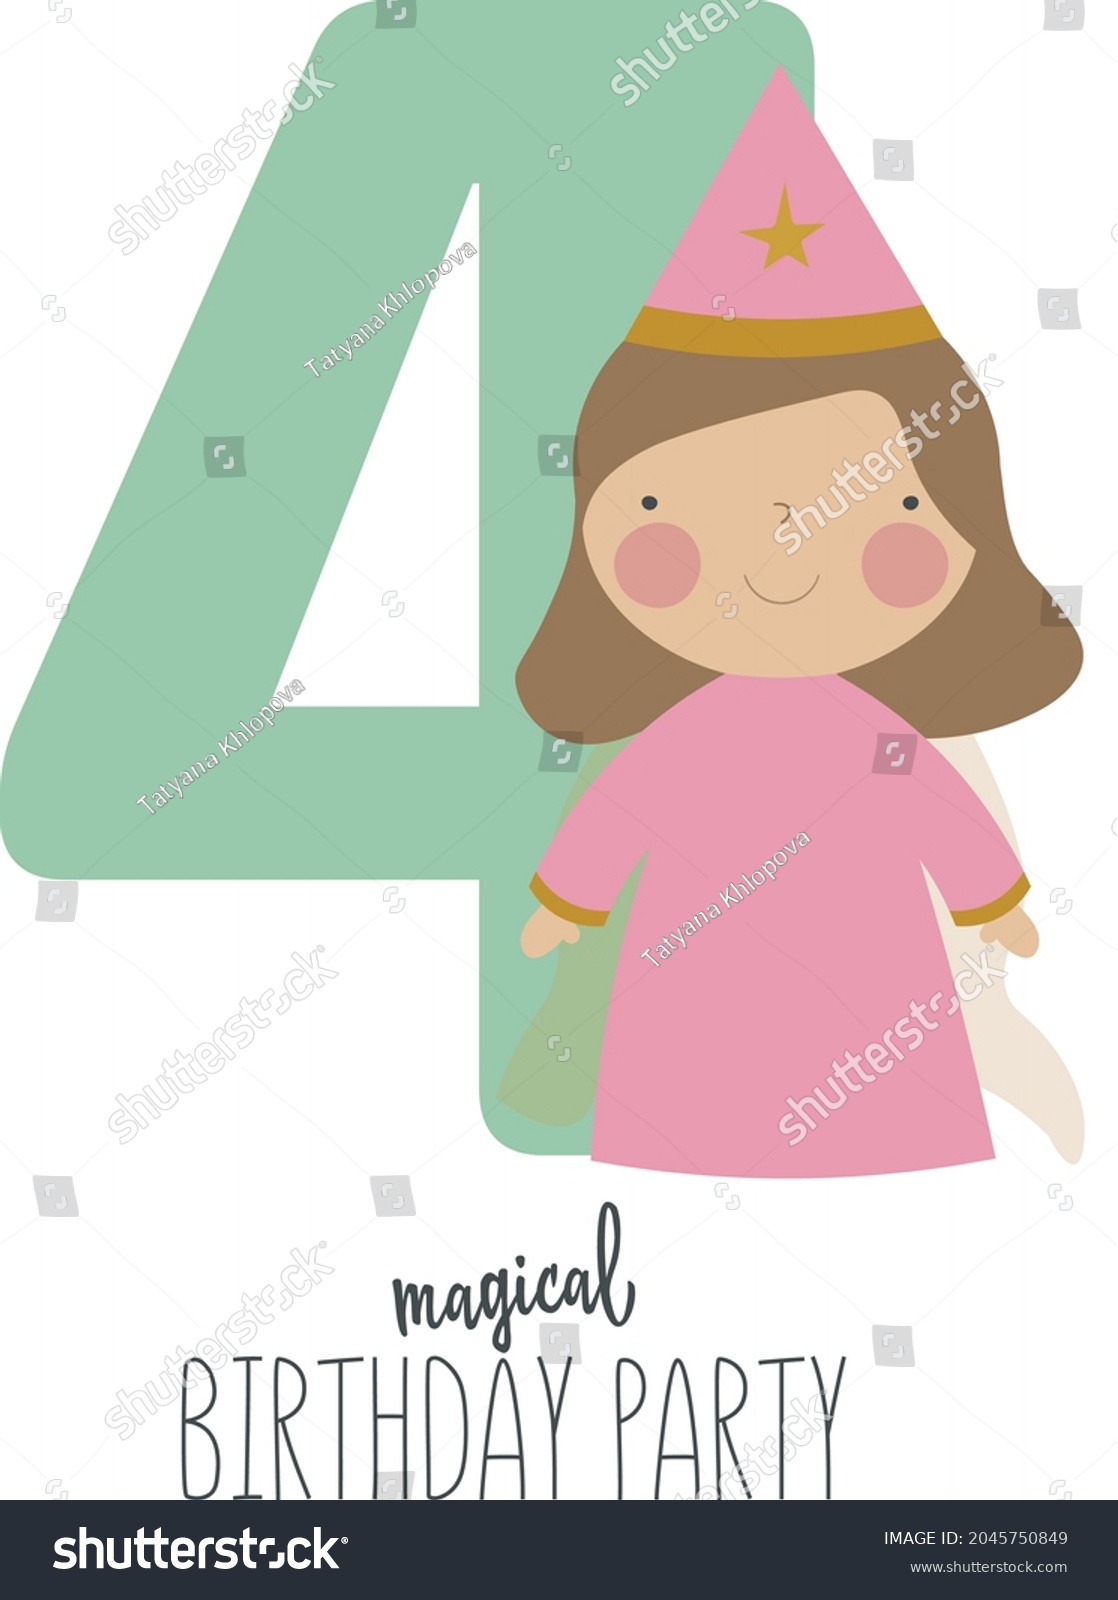 SVG of Vector illustration in cartoon style with a cute princess and the number 4. It can be used as a birthday card, poster, banner. svg